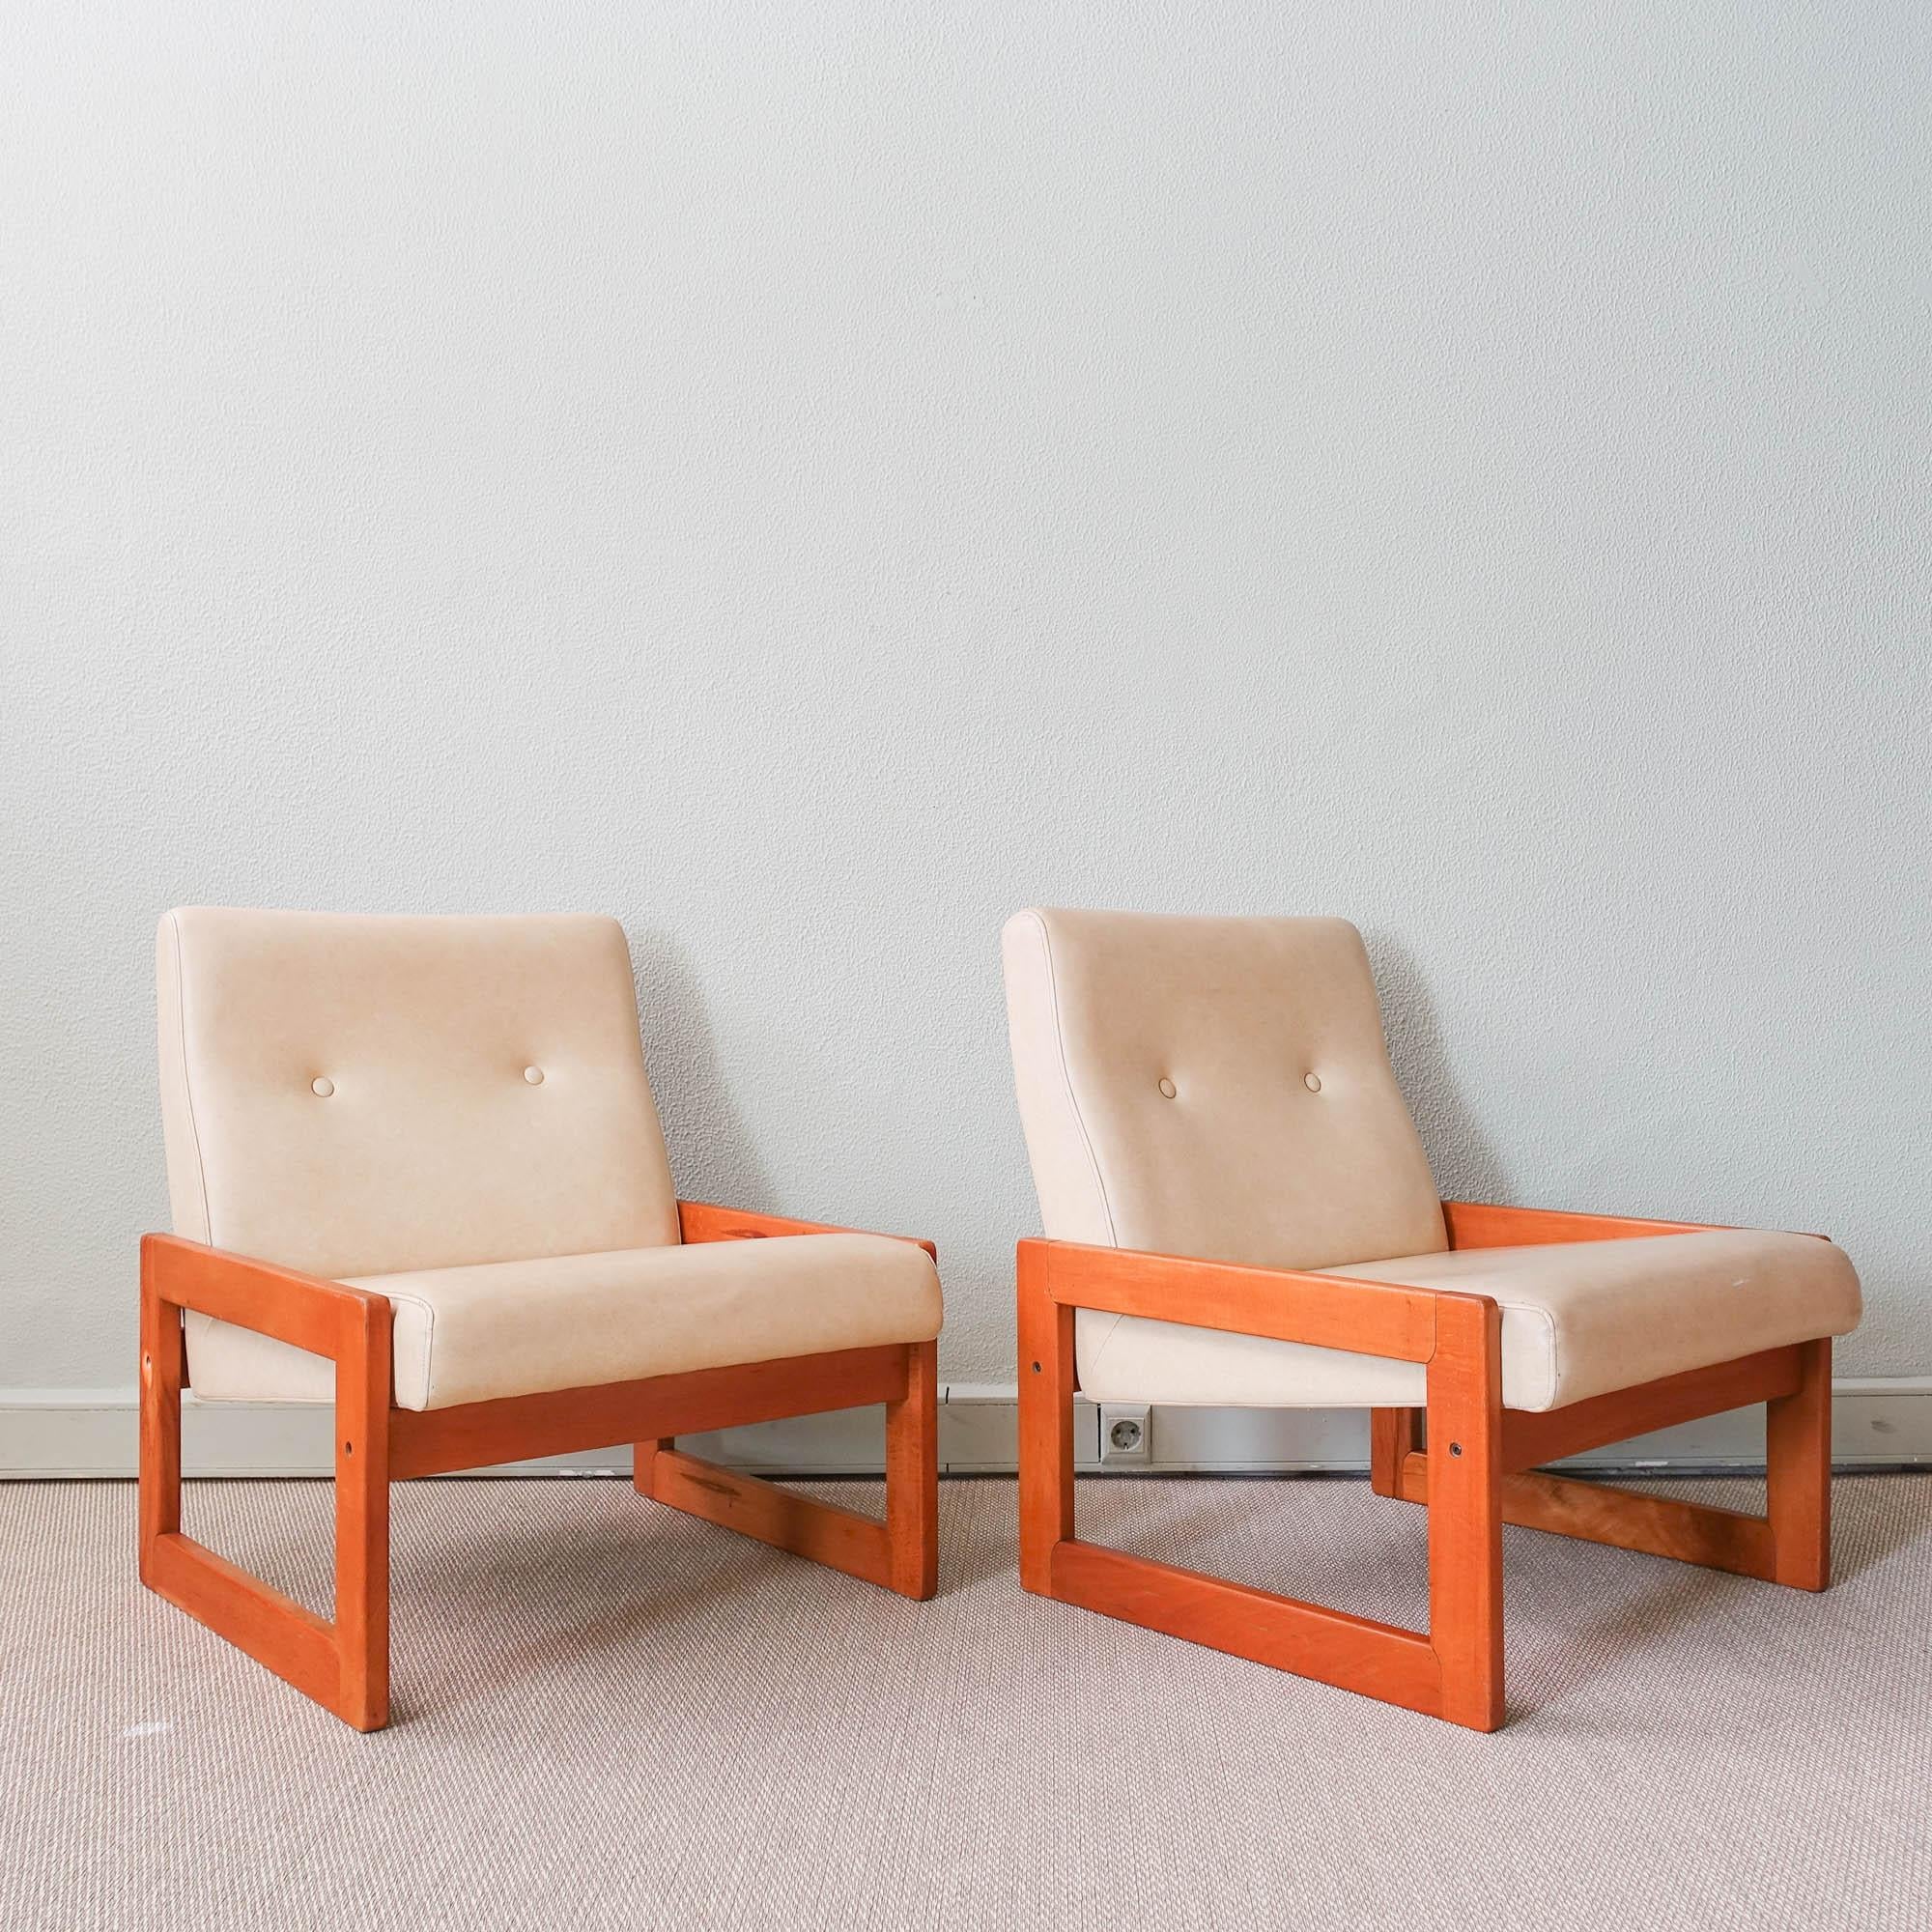 Pair of Easy Chairs, Model Espinho, by José Espinho for Olaio, 1973 For Sale 1